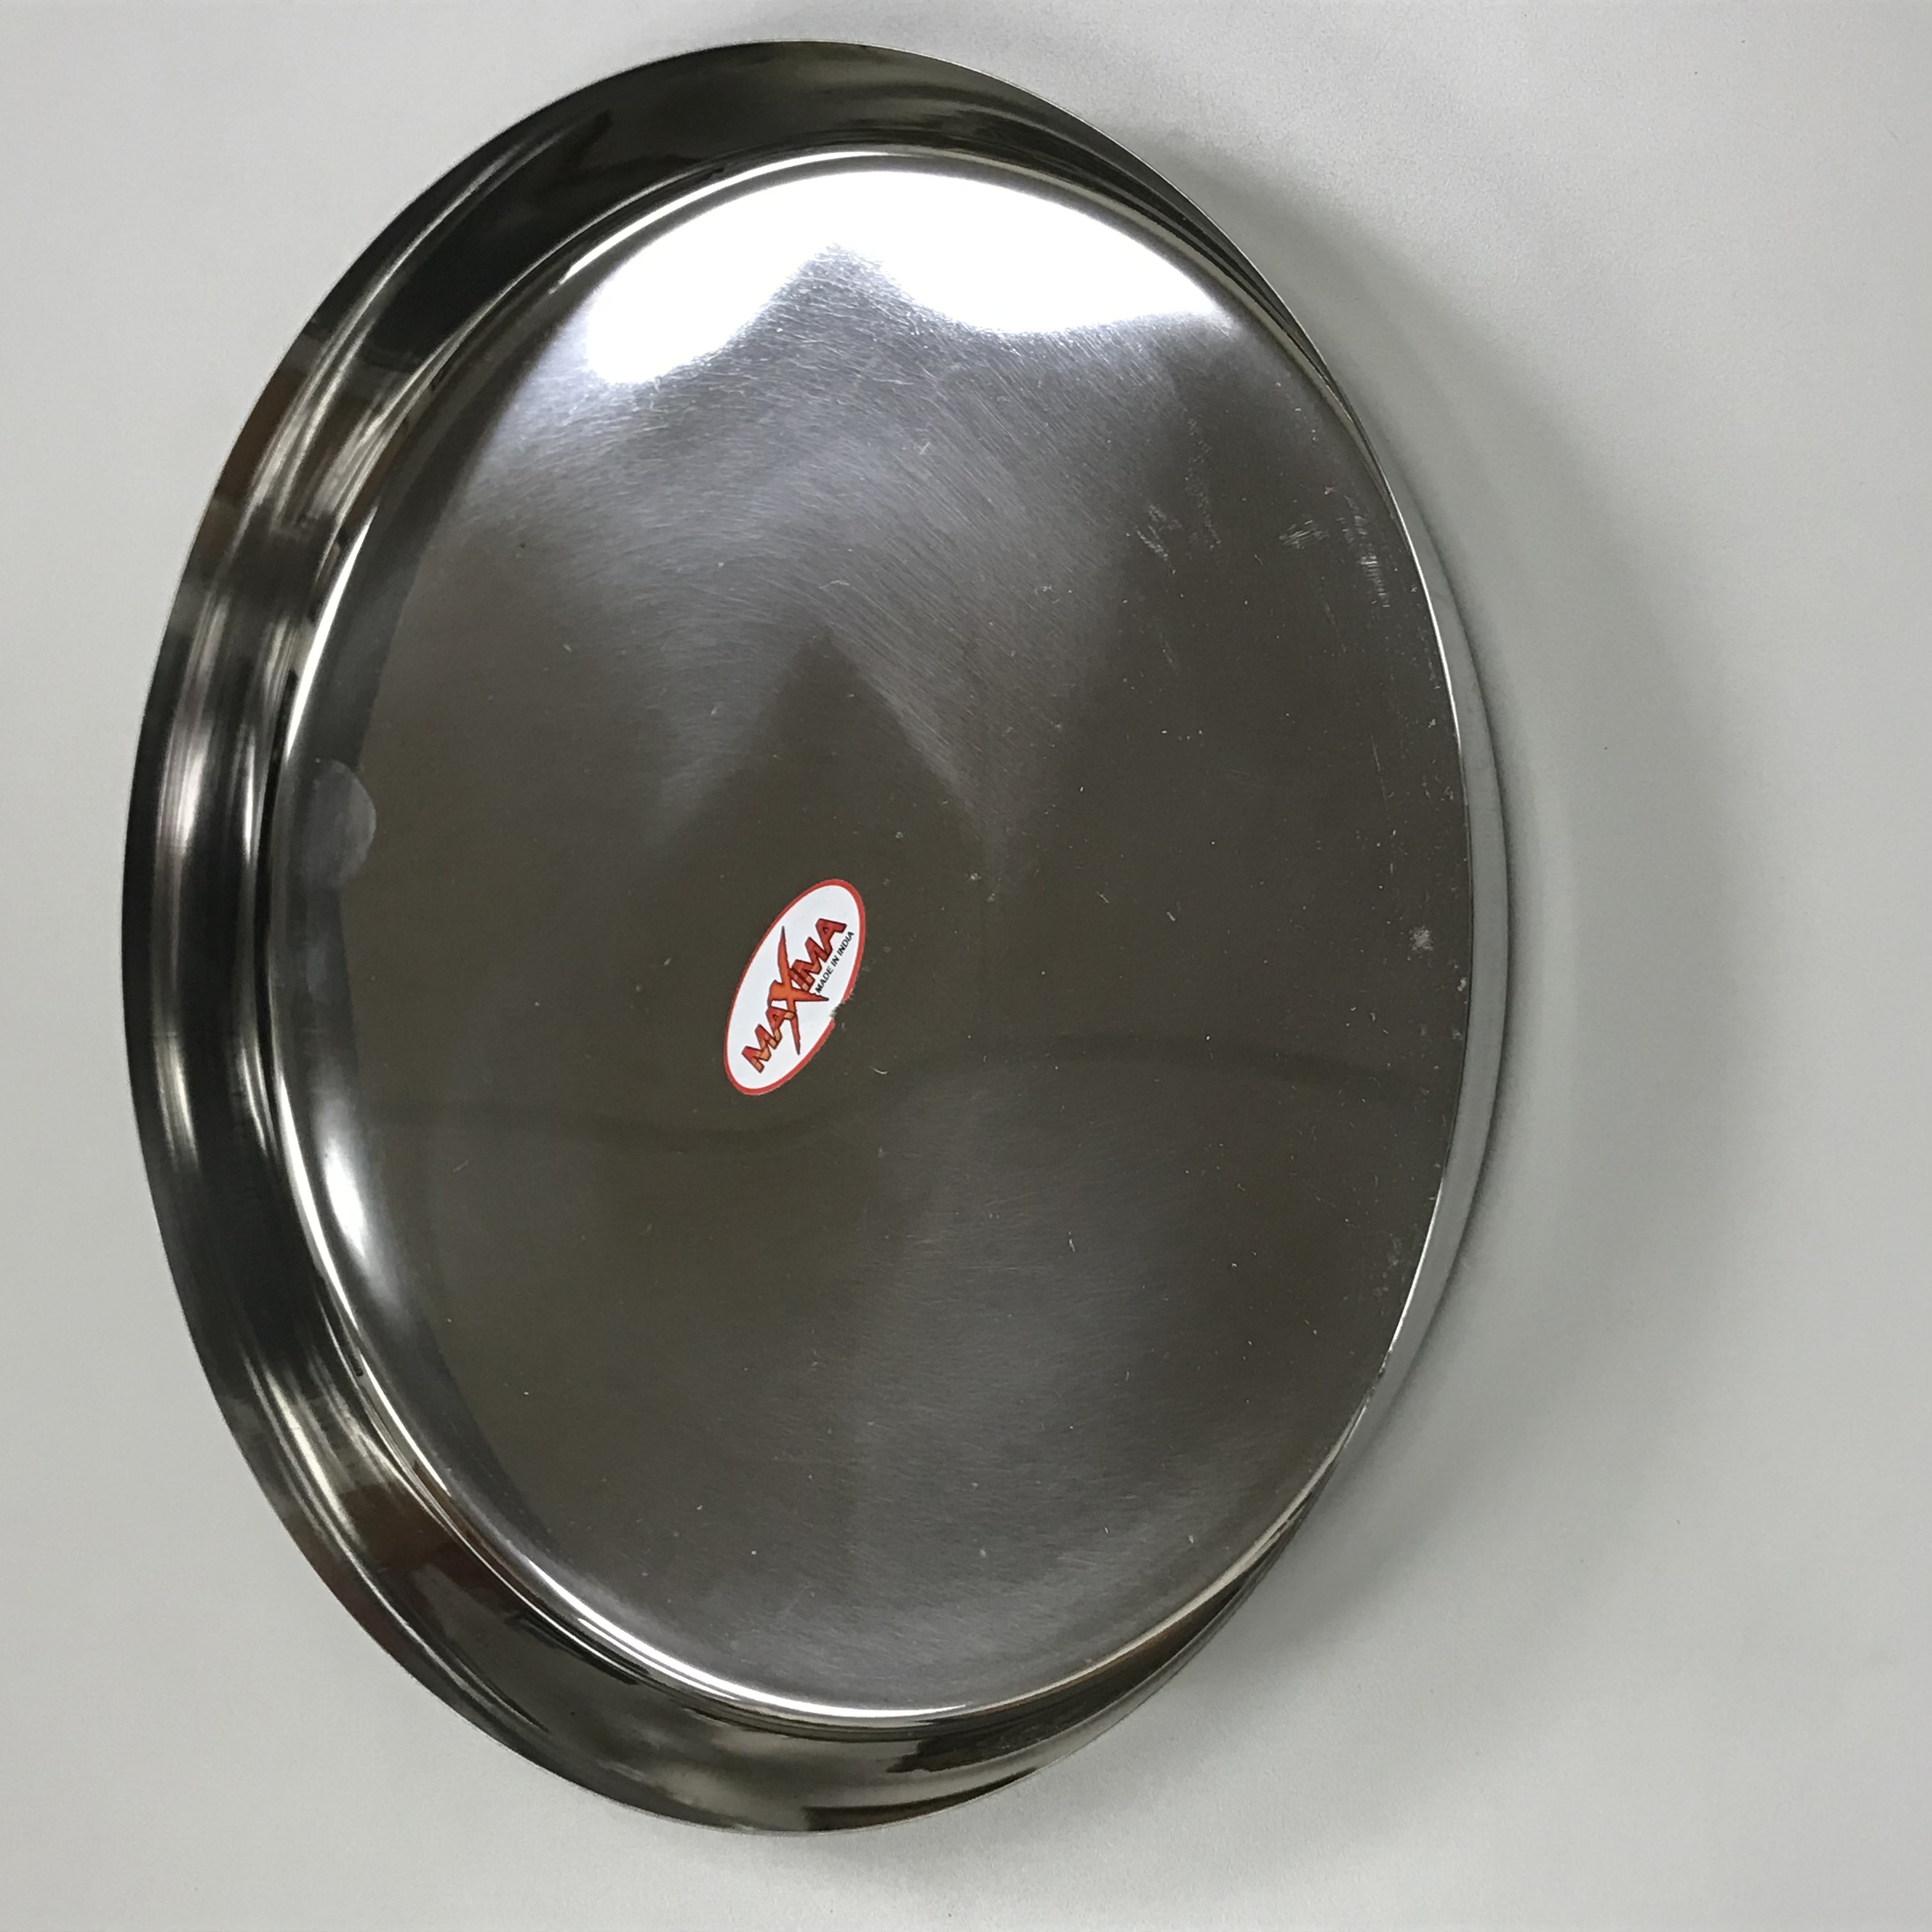 Eris 12" Steel Dinner Plate with Wall - Thali